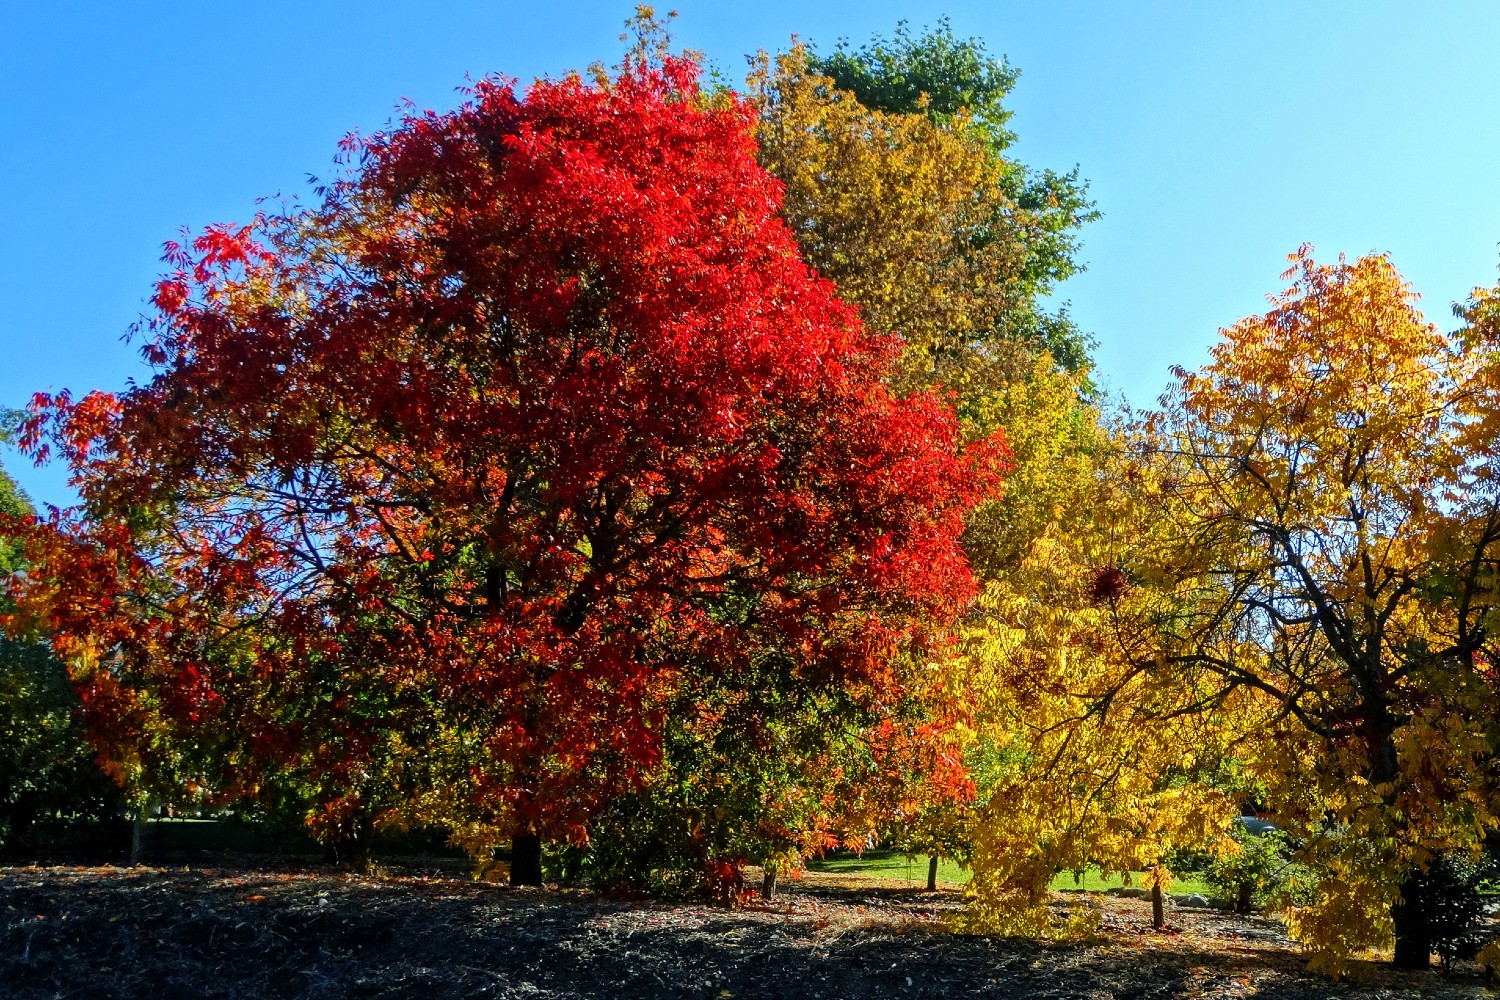  Plan a trip to see some incredible fall foliage: 7 stellar spots across the U.S. 